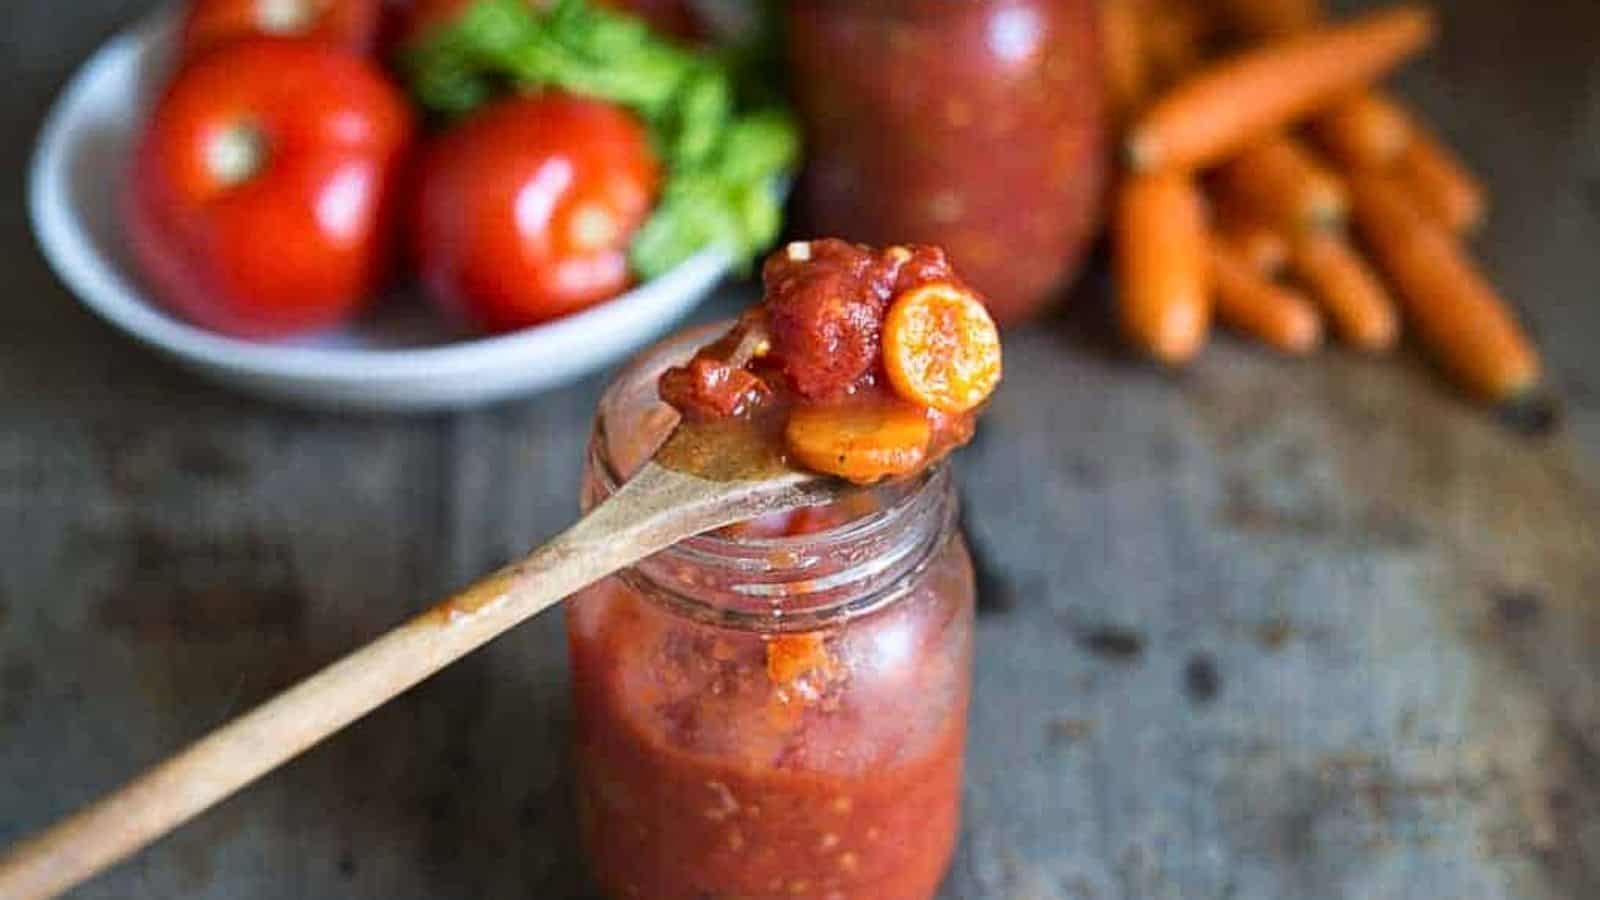 Tomato sauce in a jar with carrots and tomatoes.